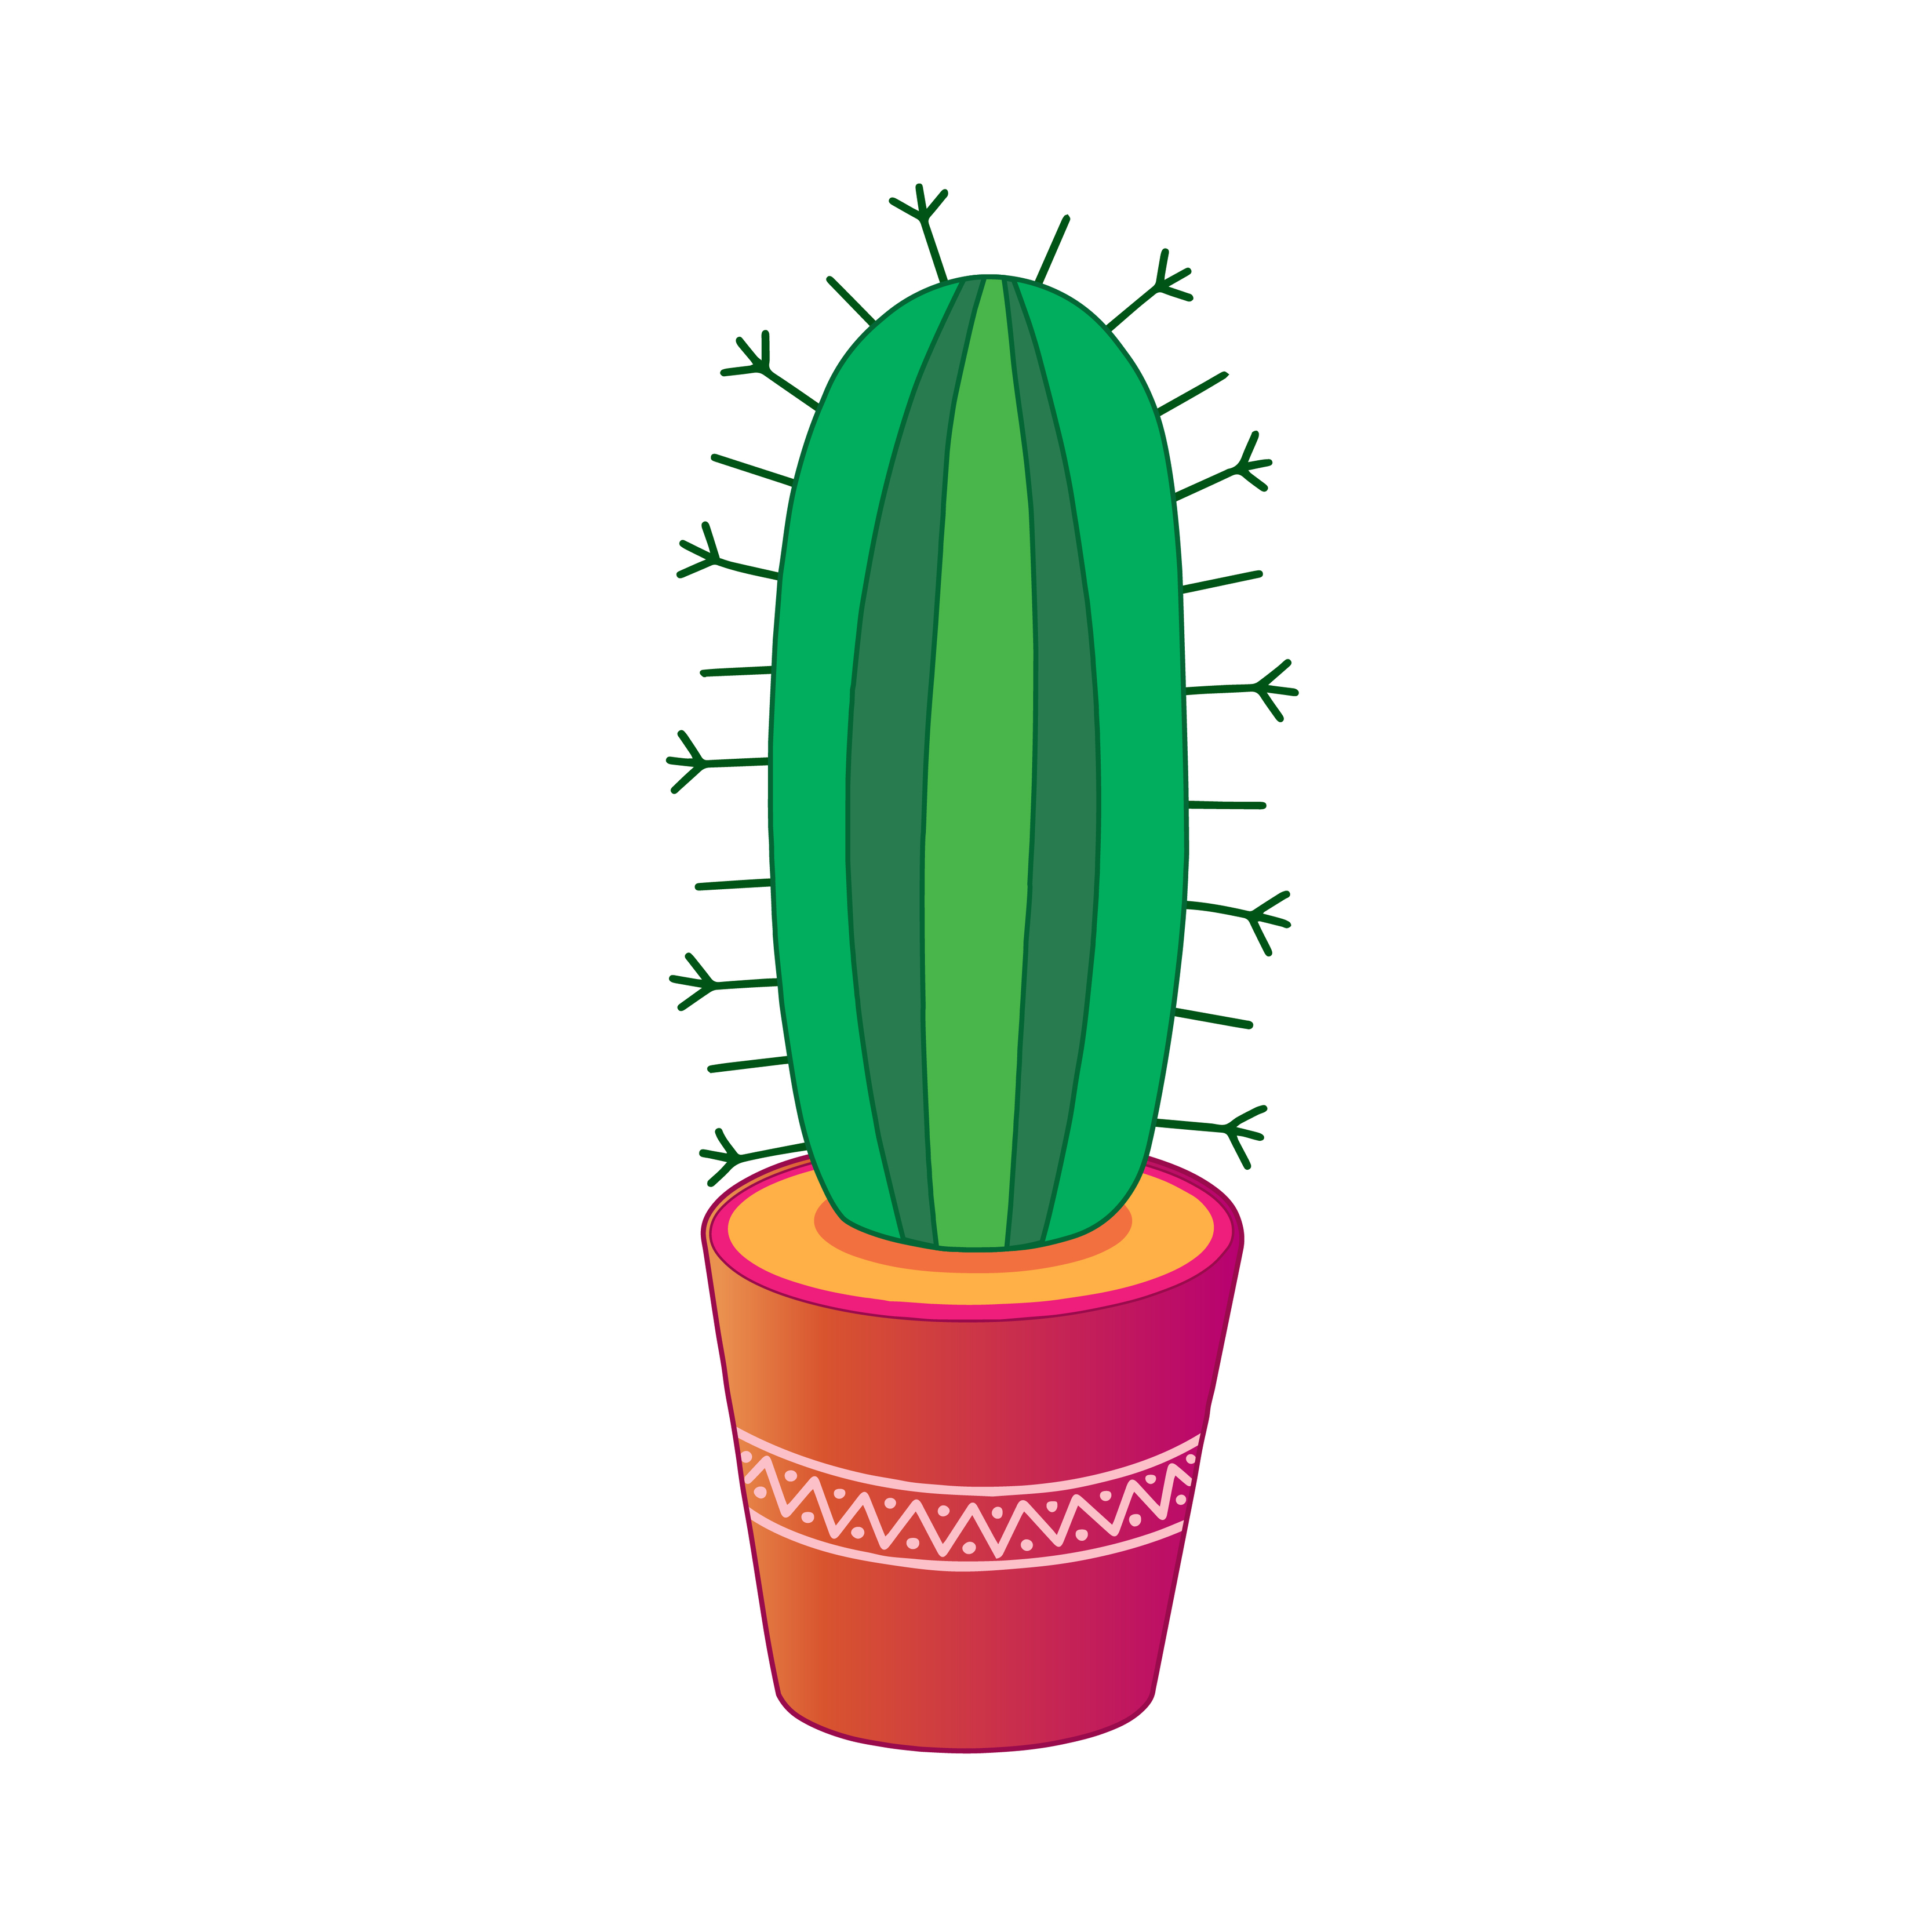 Cactus. Home cactus in pot. Illustration for printing, background, wallpaper, covers, packaging, greeting cards, posters, stickers, textile and seasonal design. Isolated on white background